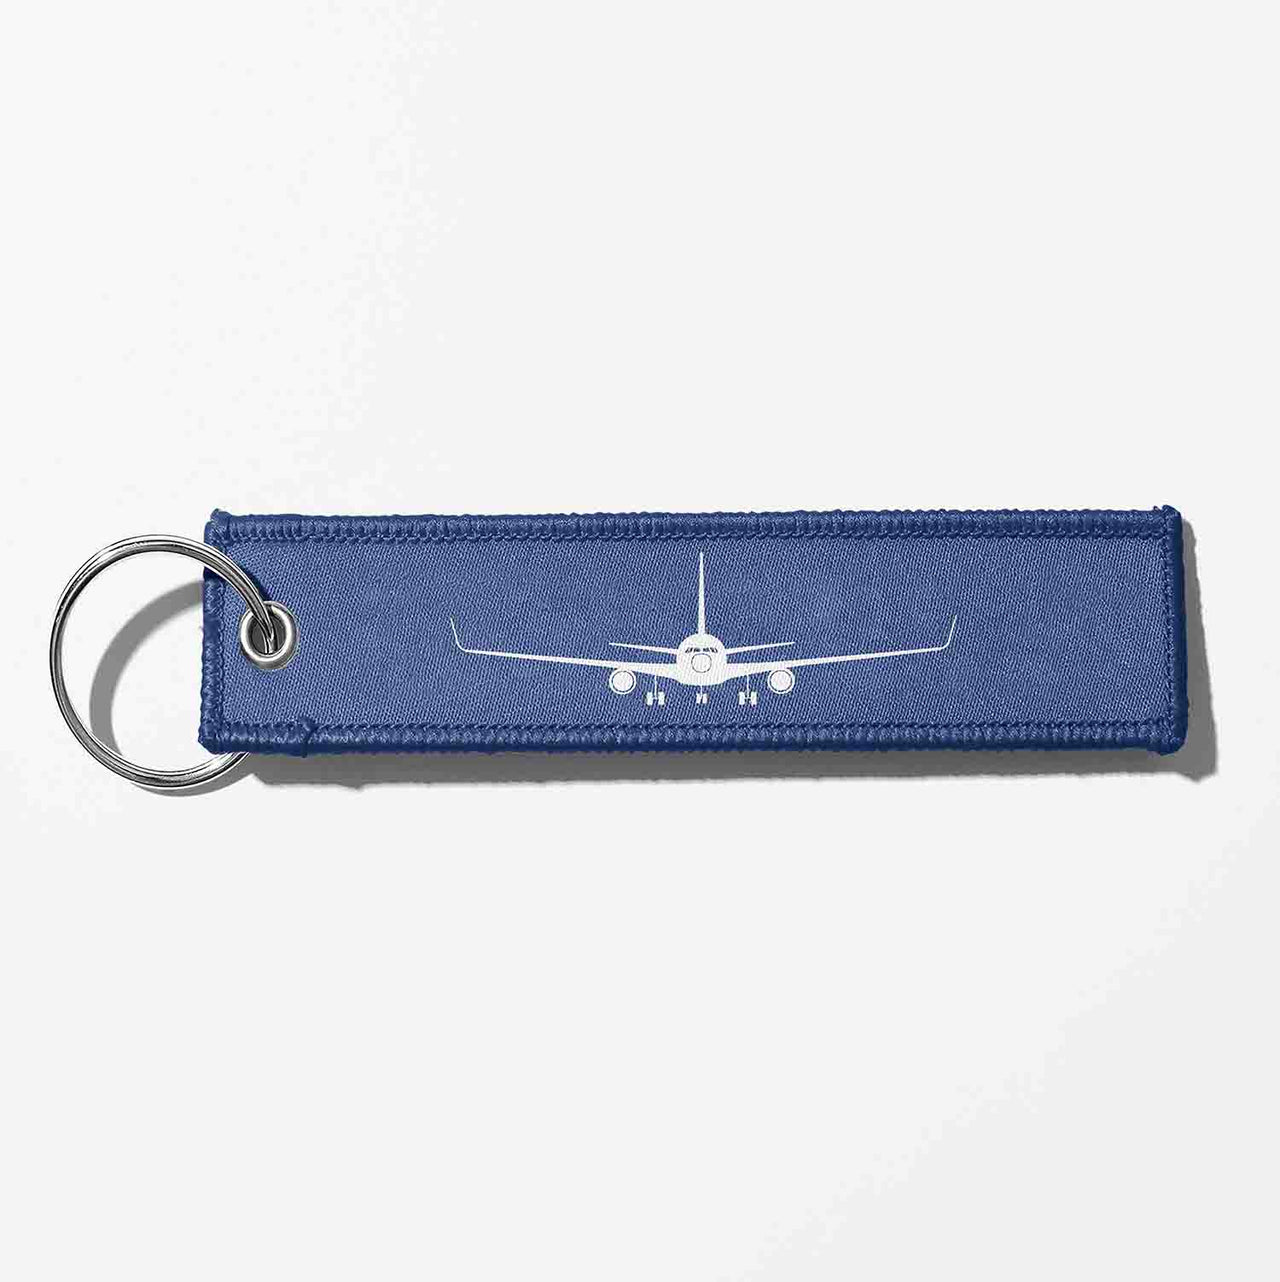 Boeing 767 Silhouette Designed Key Chains